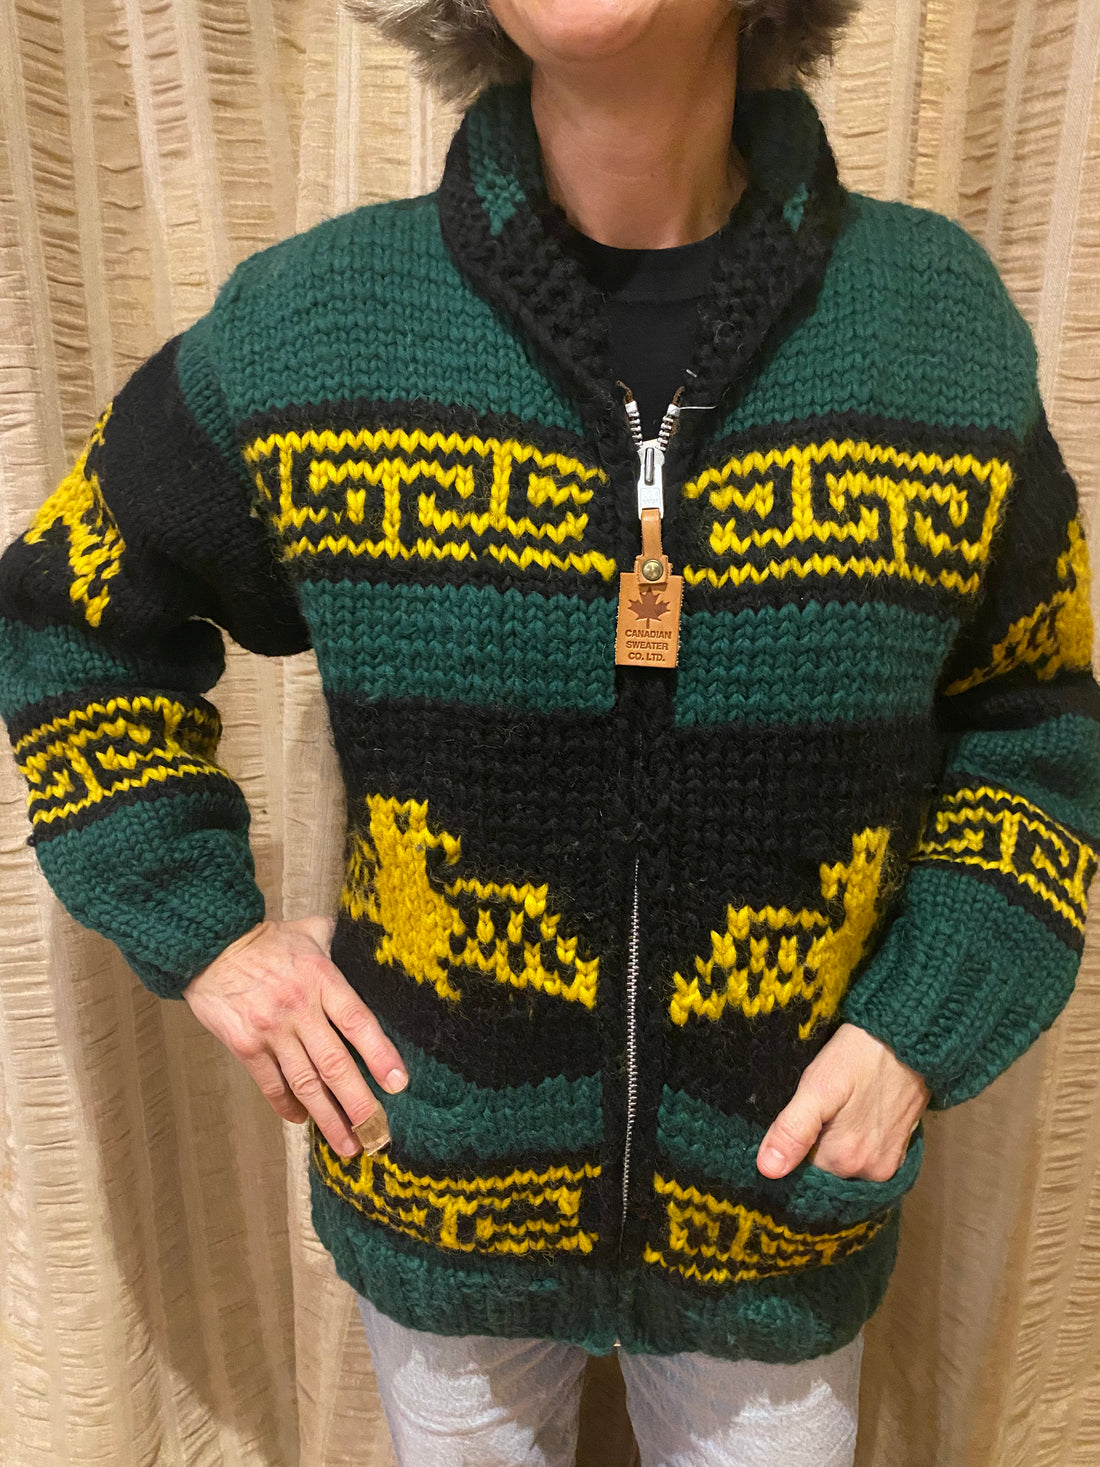 Cowichan Design Sweater - M/L – Amos & Andes Canada Inc